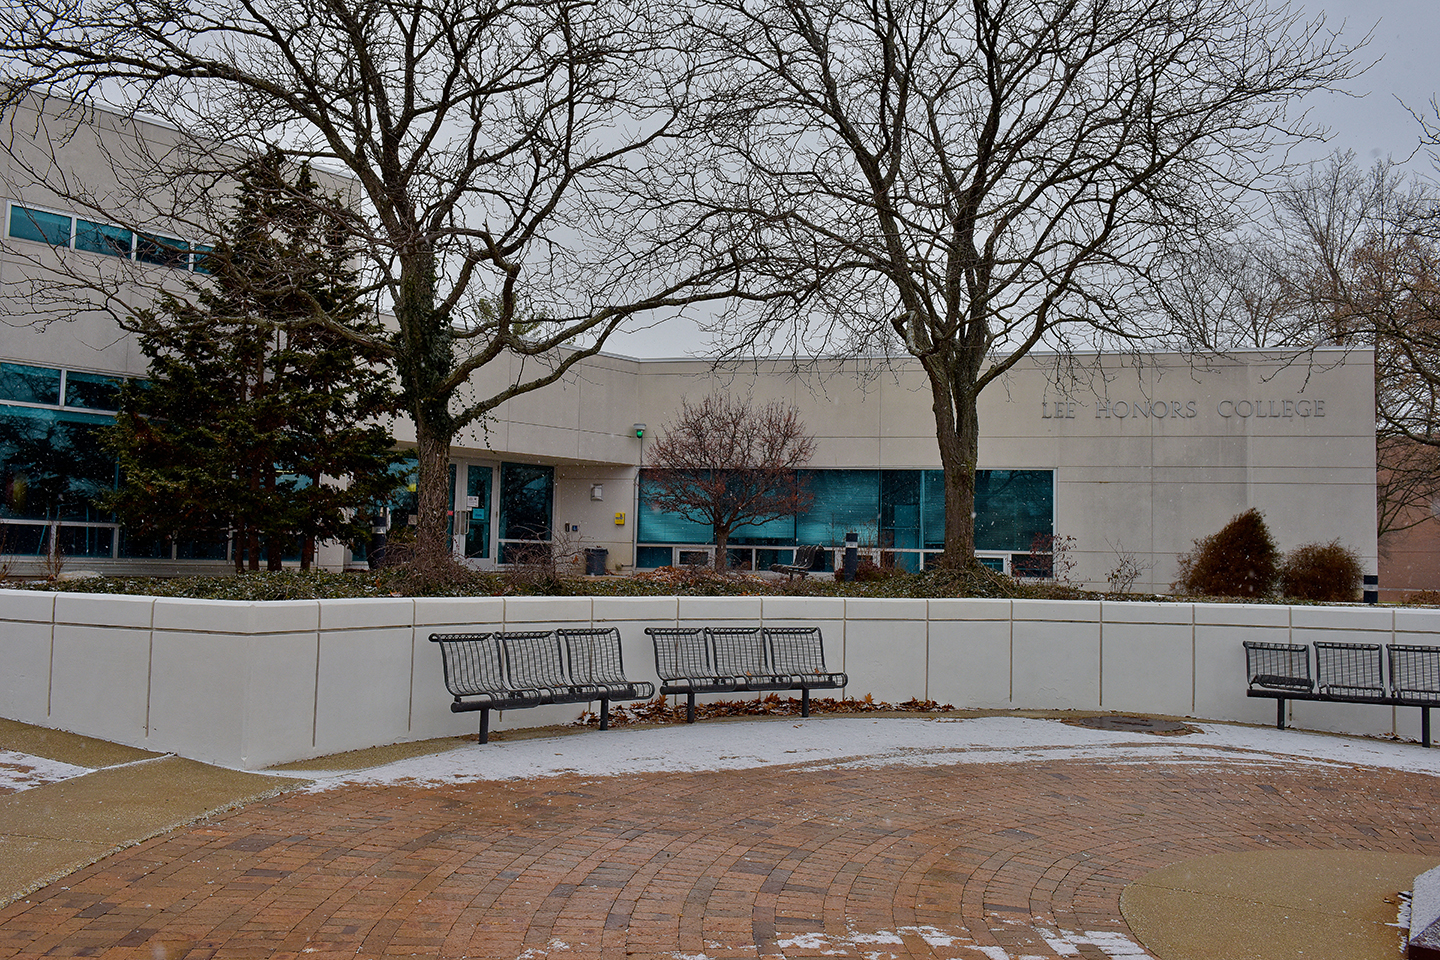 Exterior photo of the Lee Honors College taken in winter.